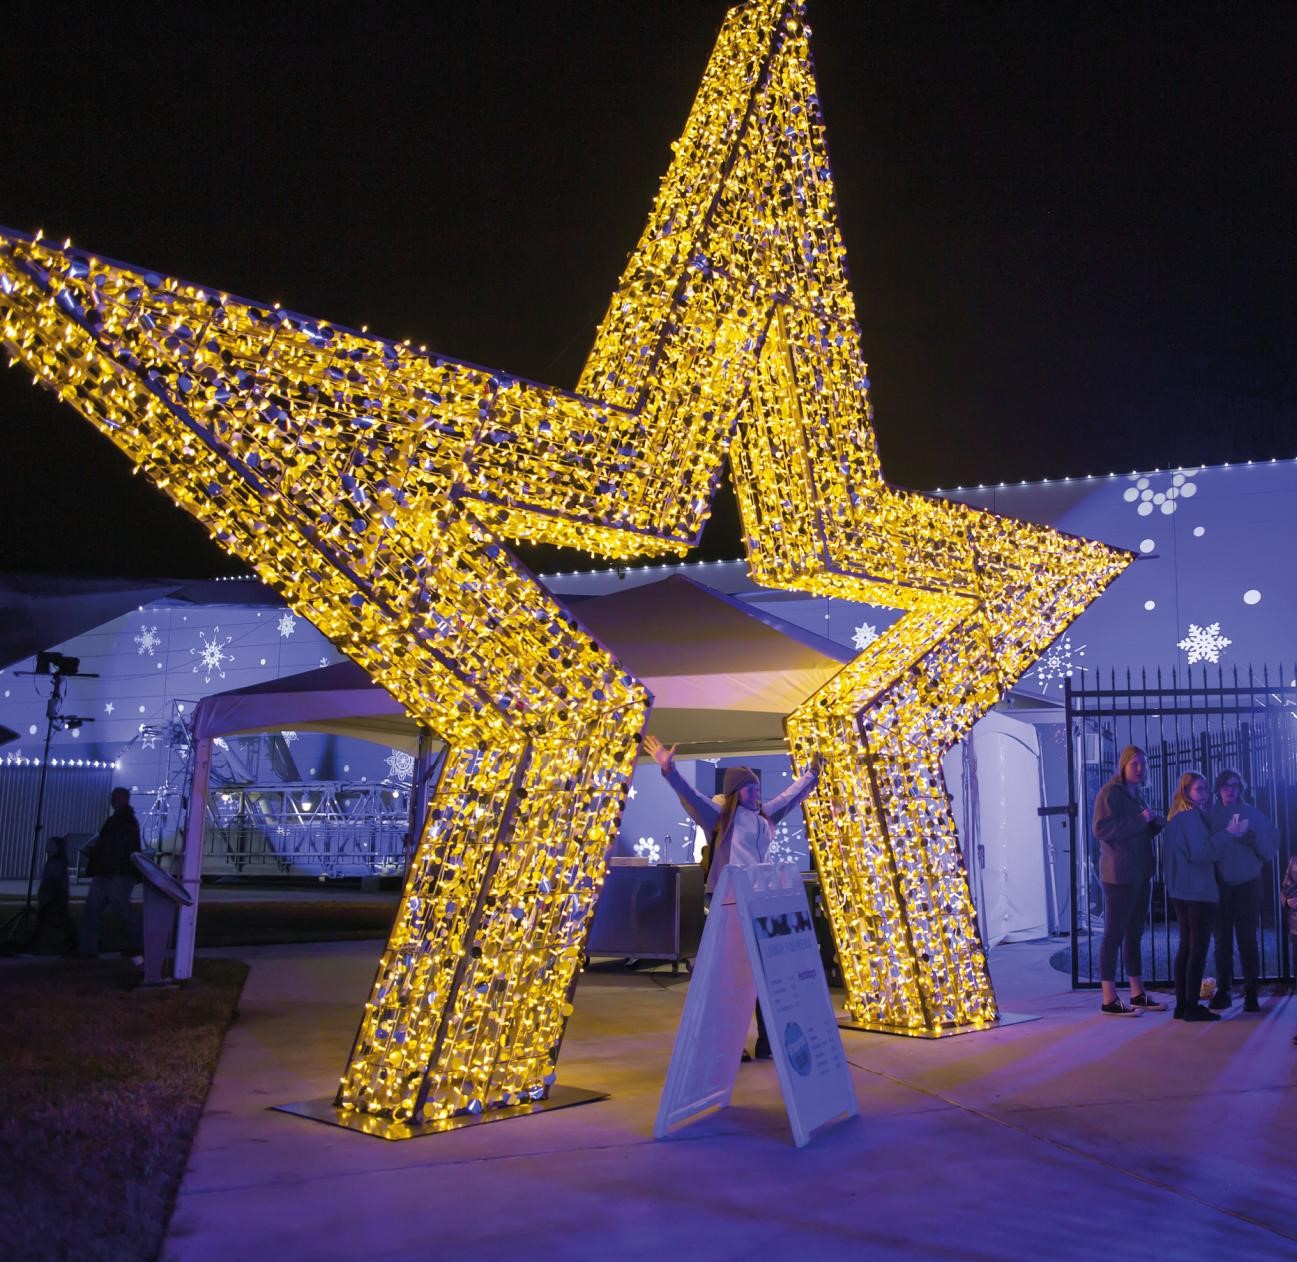 Light up gold star motif displayed outside the entrance of an outdoor event.